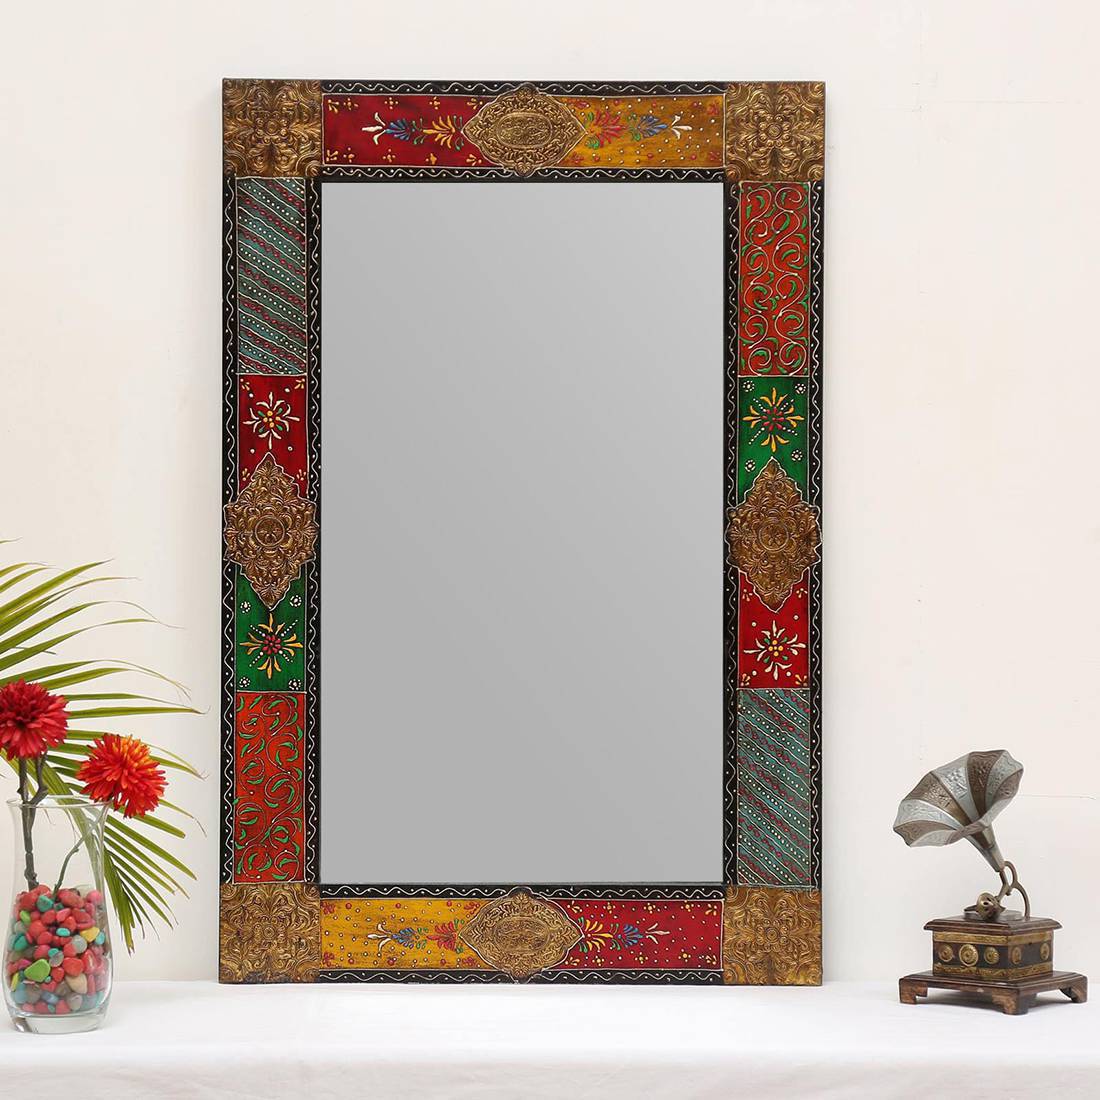 Buy Flower Metal Wall Mirror Online in India at Best Price - Modern Wall  Mirrors - Mirrors - Home Decor - Furniture - Wooden Street Product